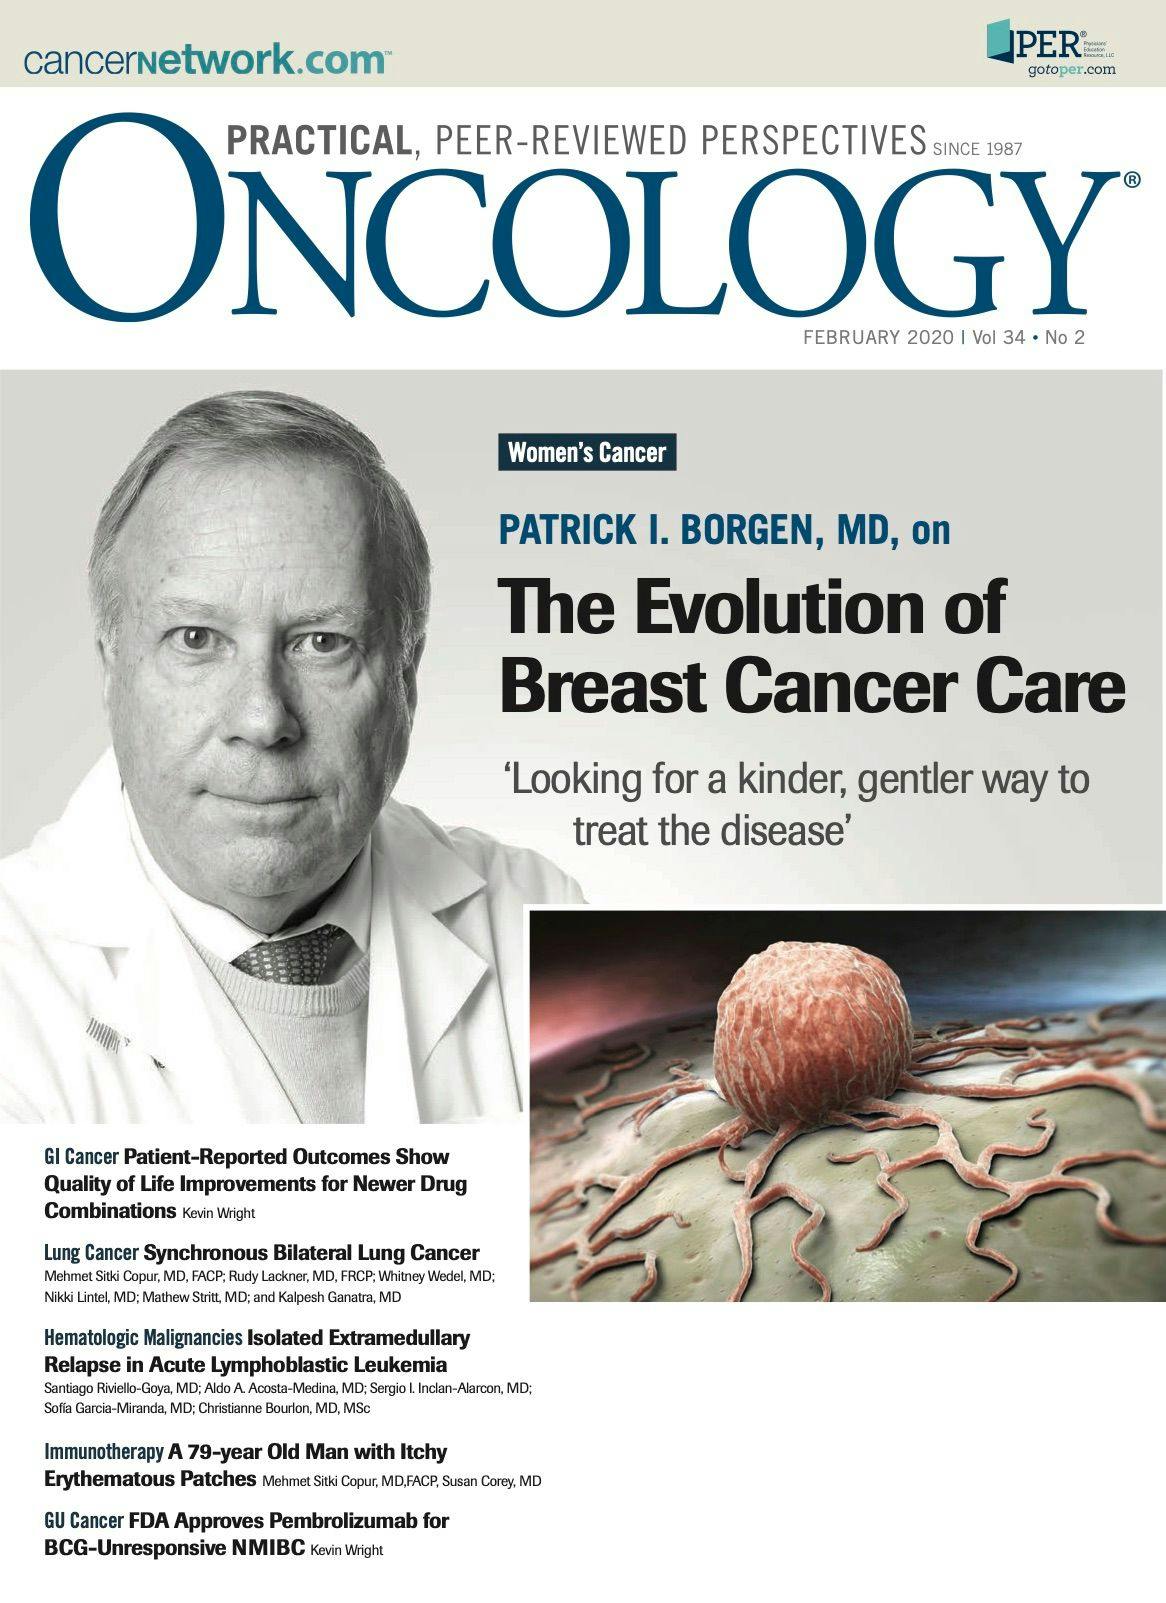 ONCOLOGY Vol 34 Issue 2